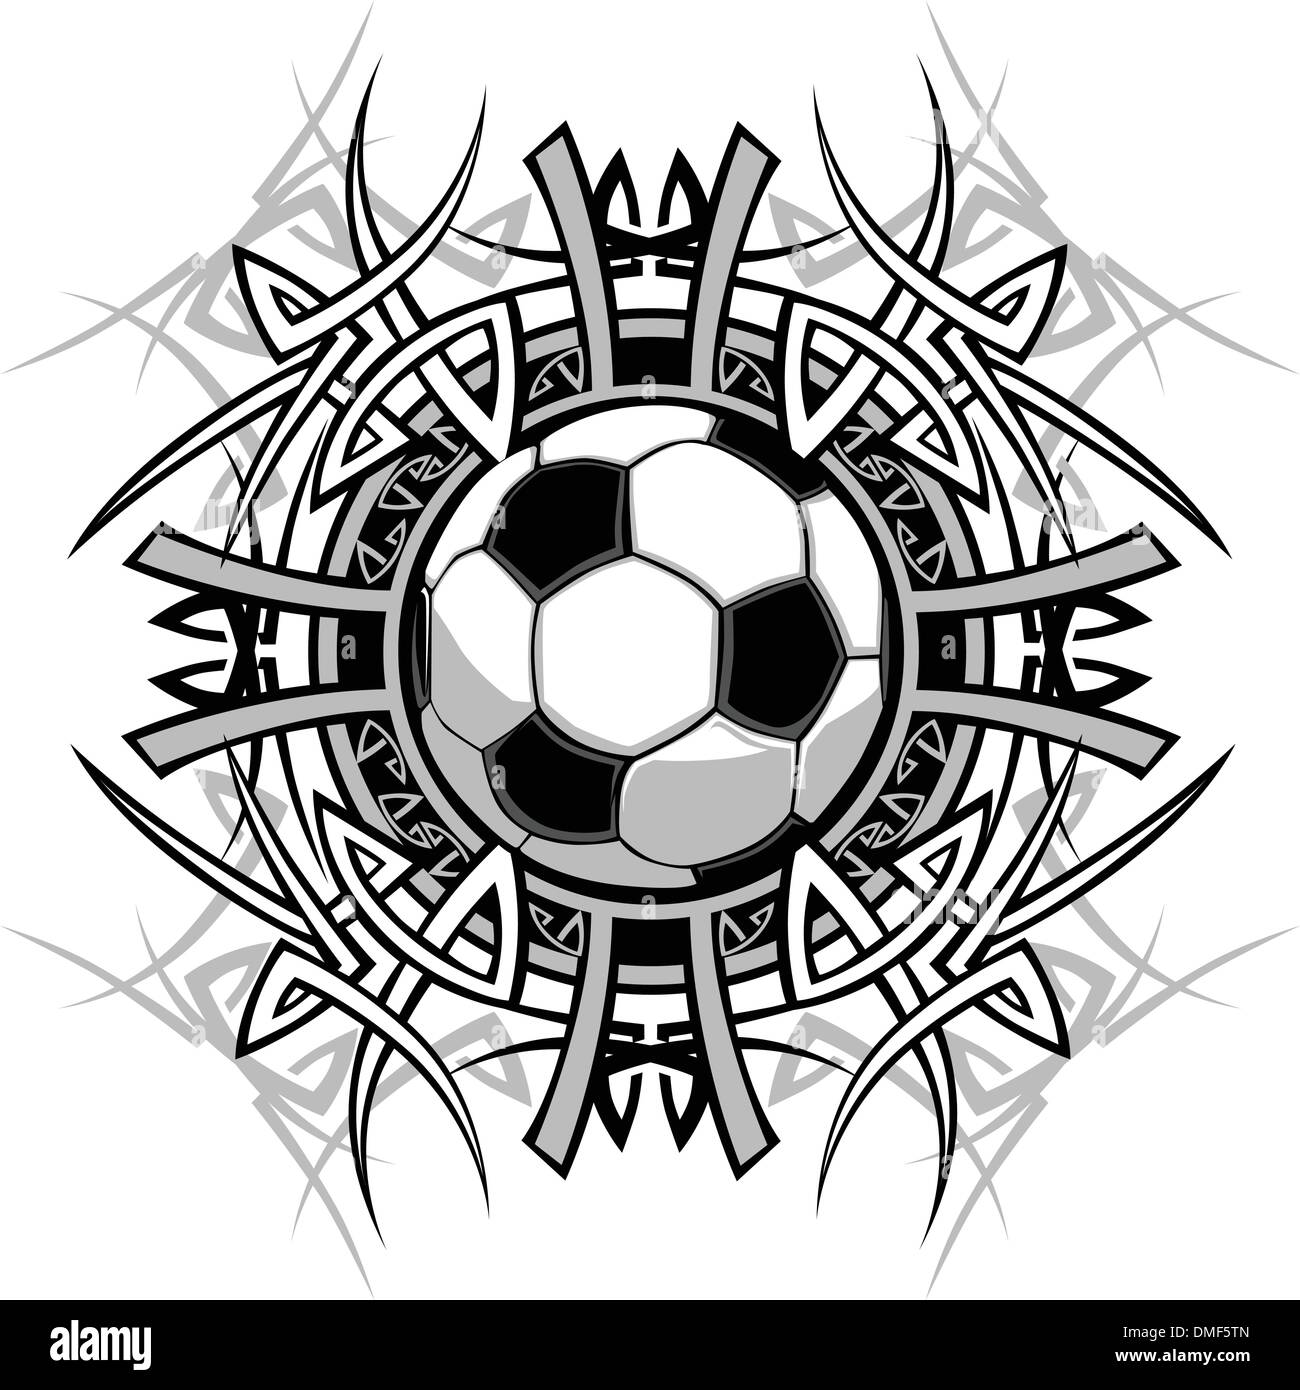 Soccer Tribal Graphic Image Stock Vector